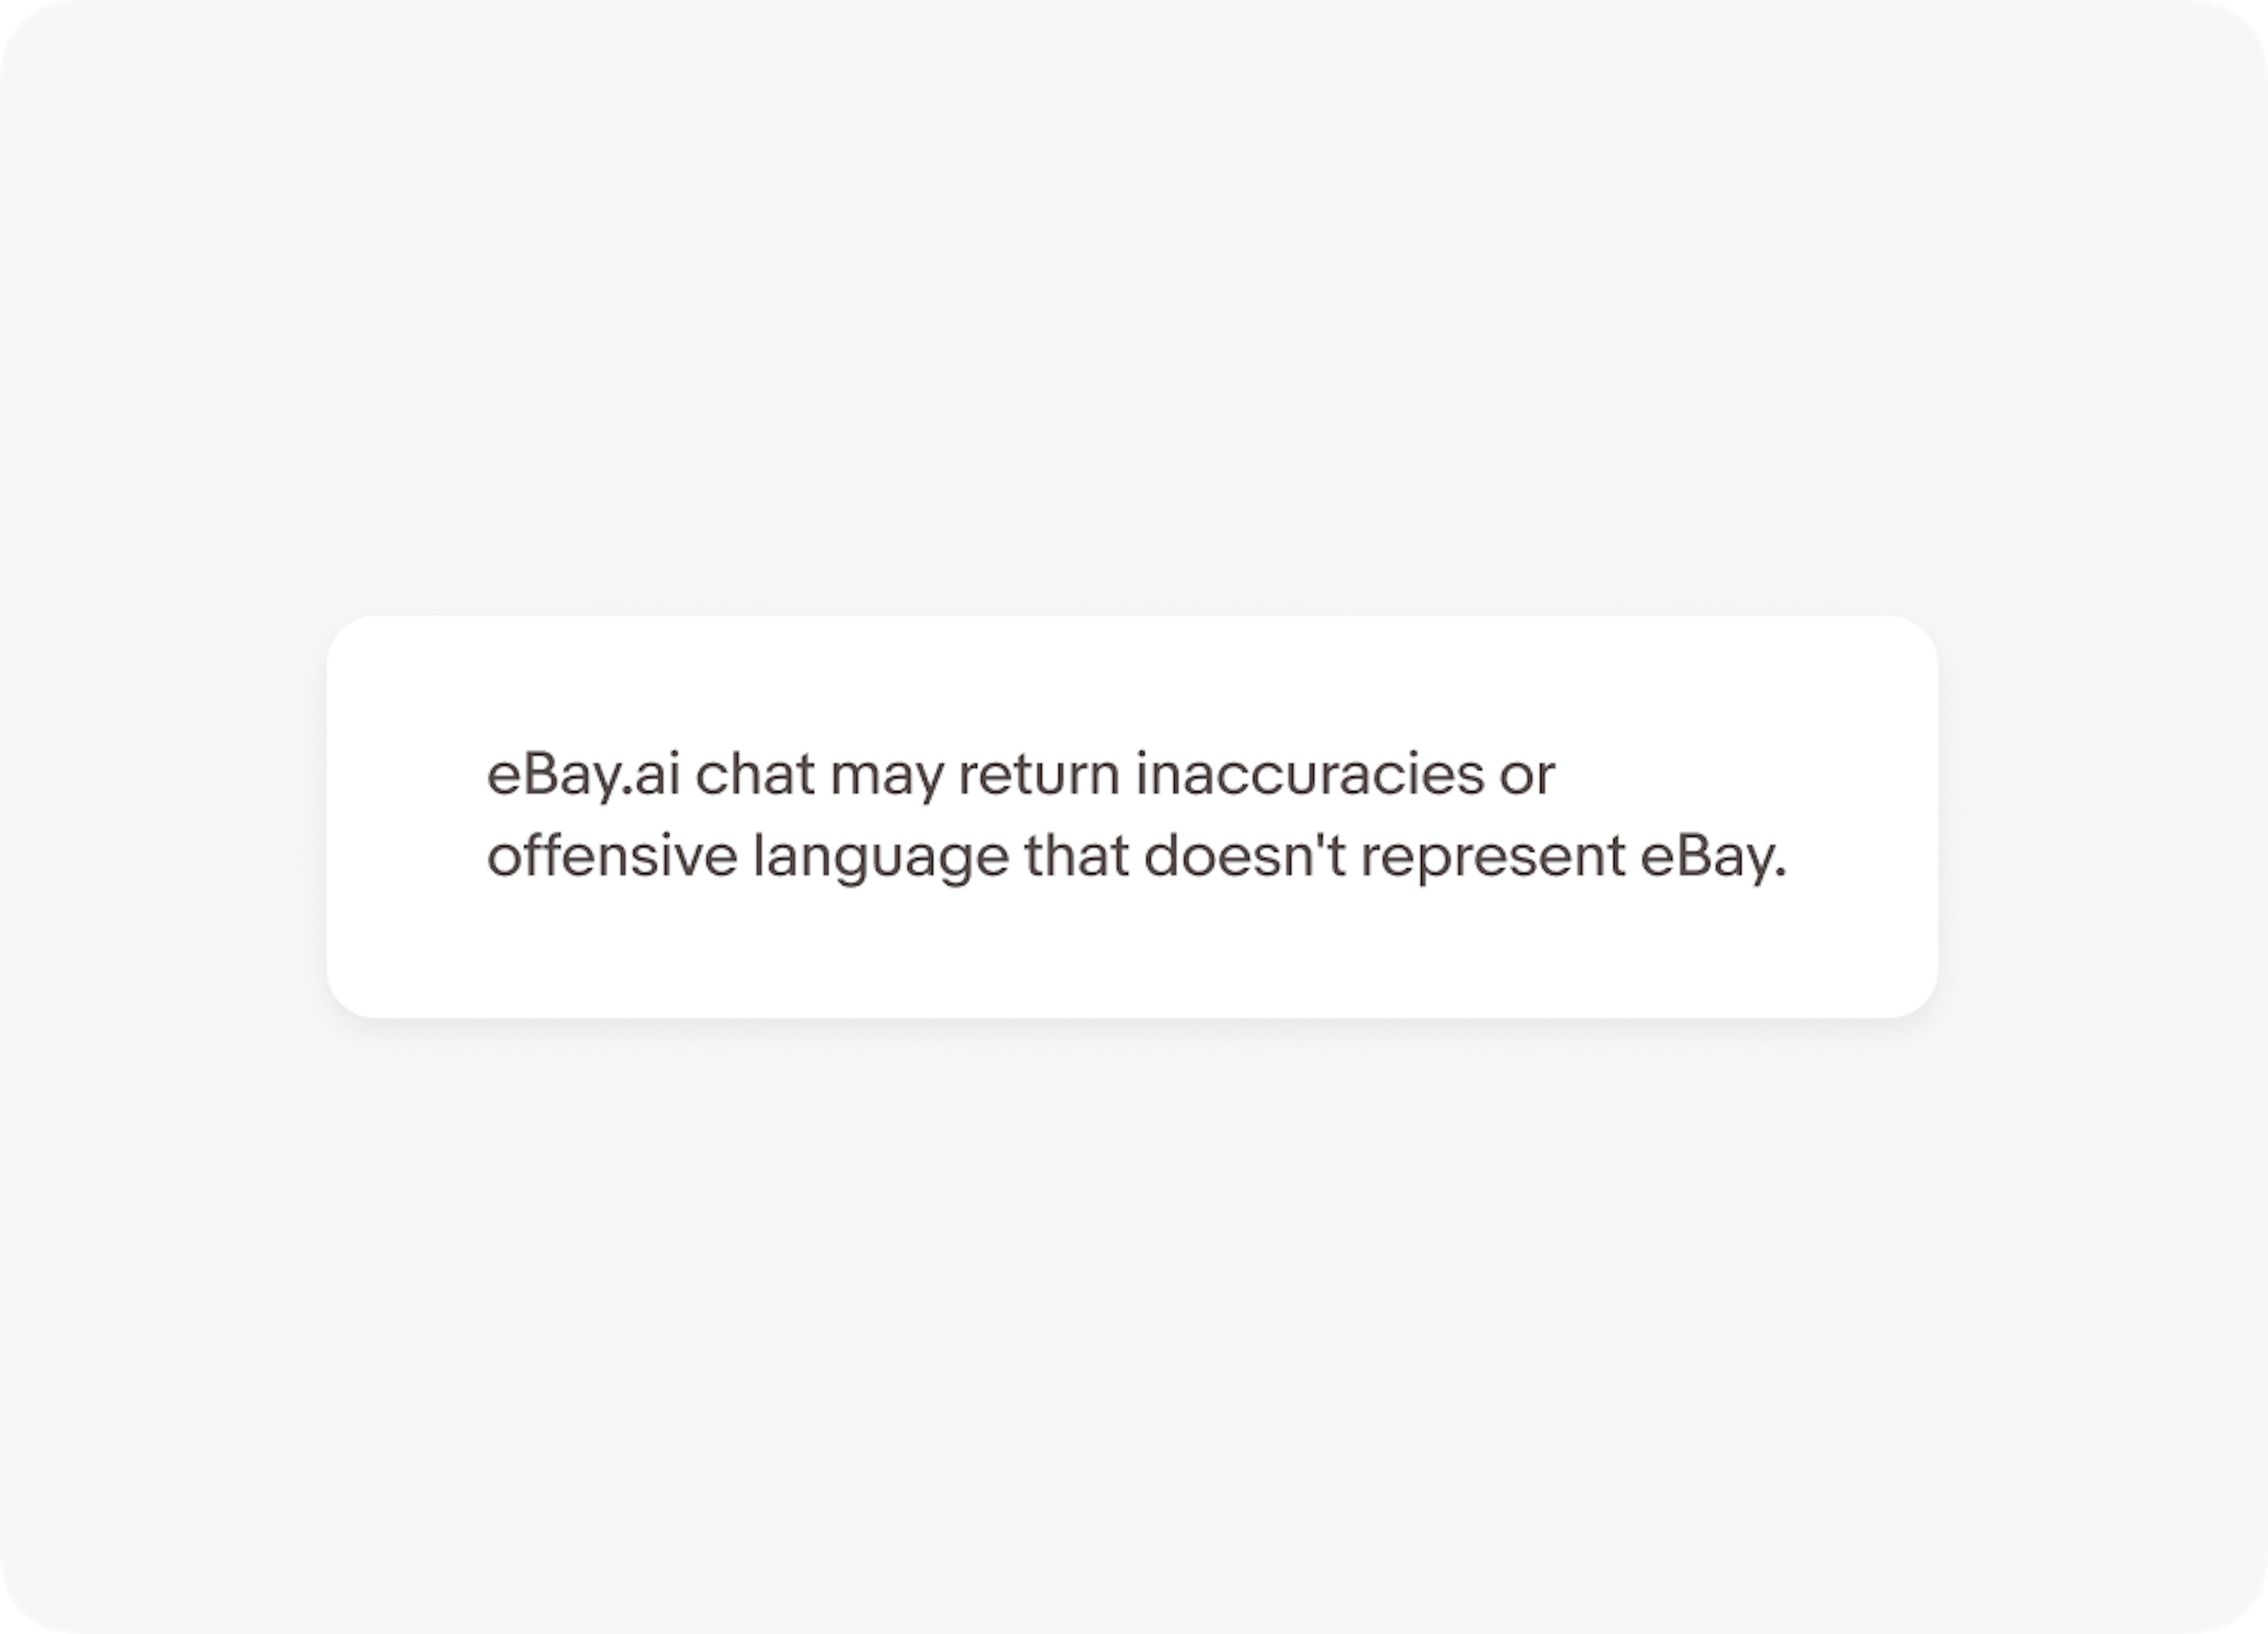 Two lines of text left aligned that say, “eBay.ai chat may return inaccuracies or offensive language that doesn't represent eBay.”